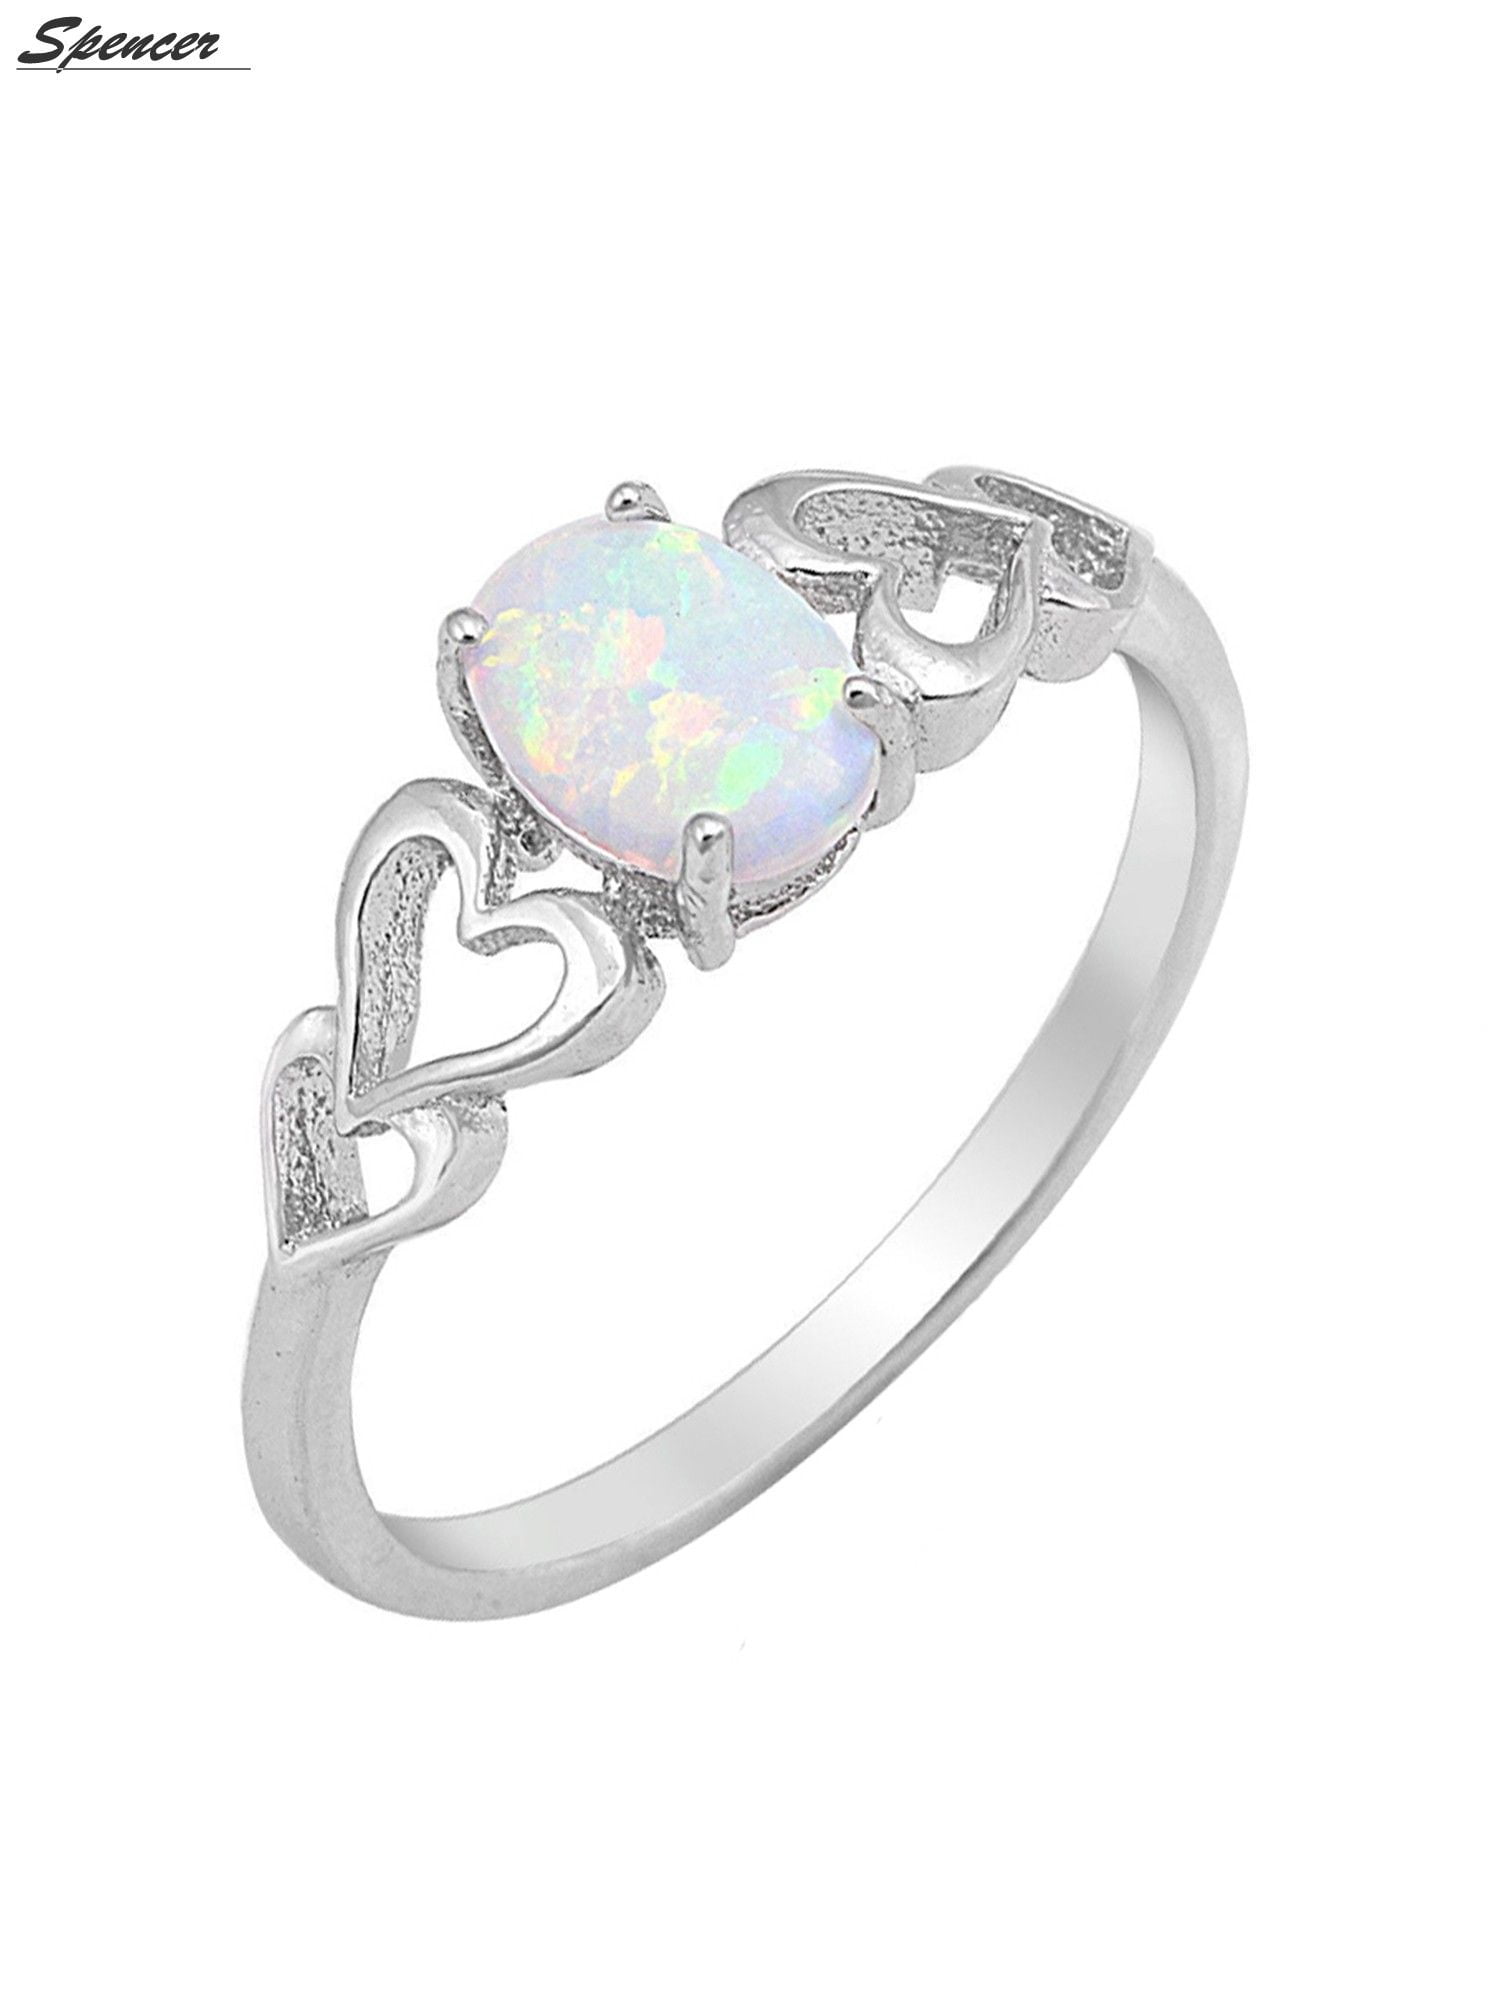 HOT 925 Sterling Silver White Fire Opal Gemstone Lady Jewelry Ring Size 6 7 8 9 